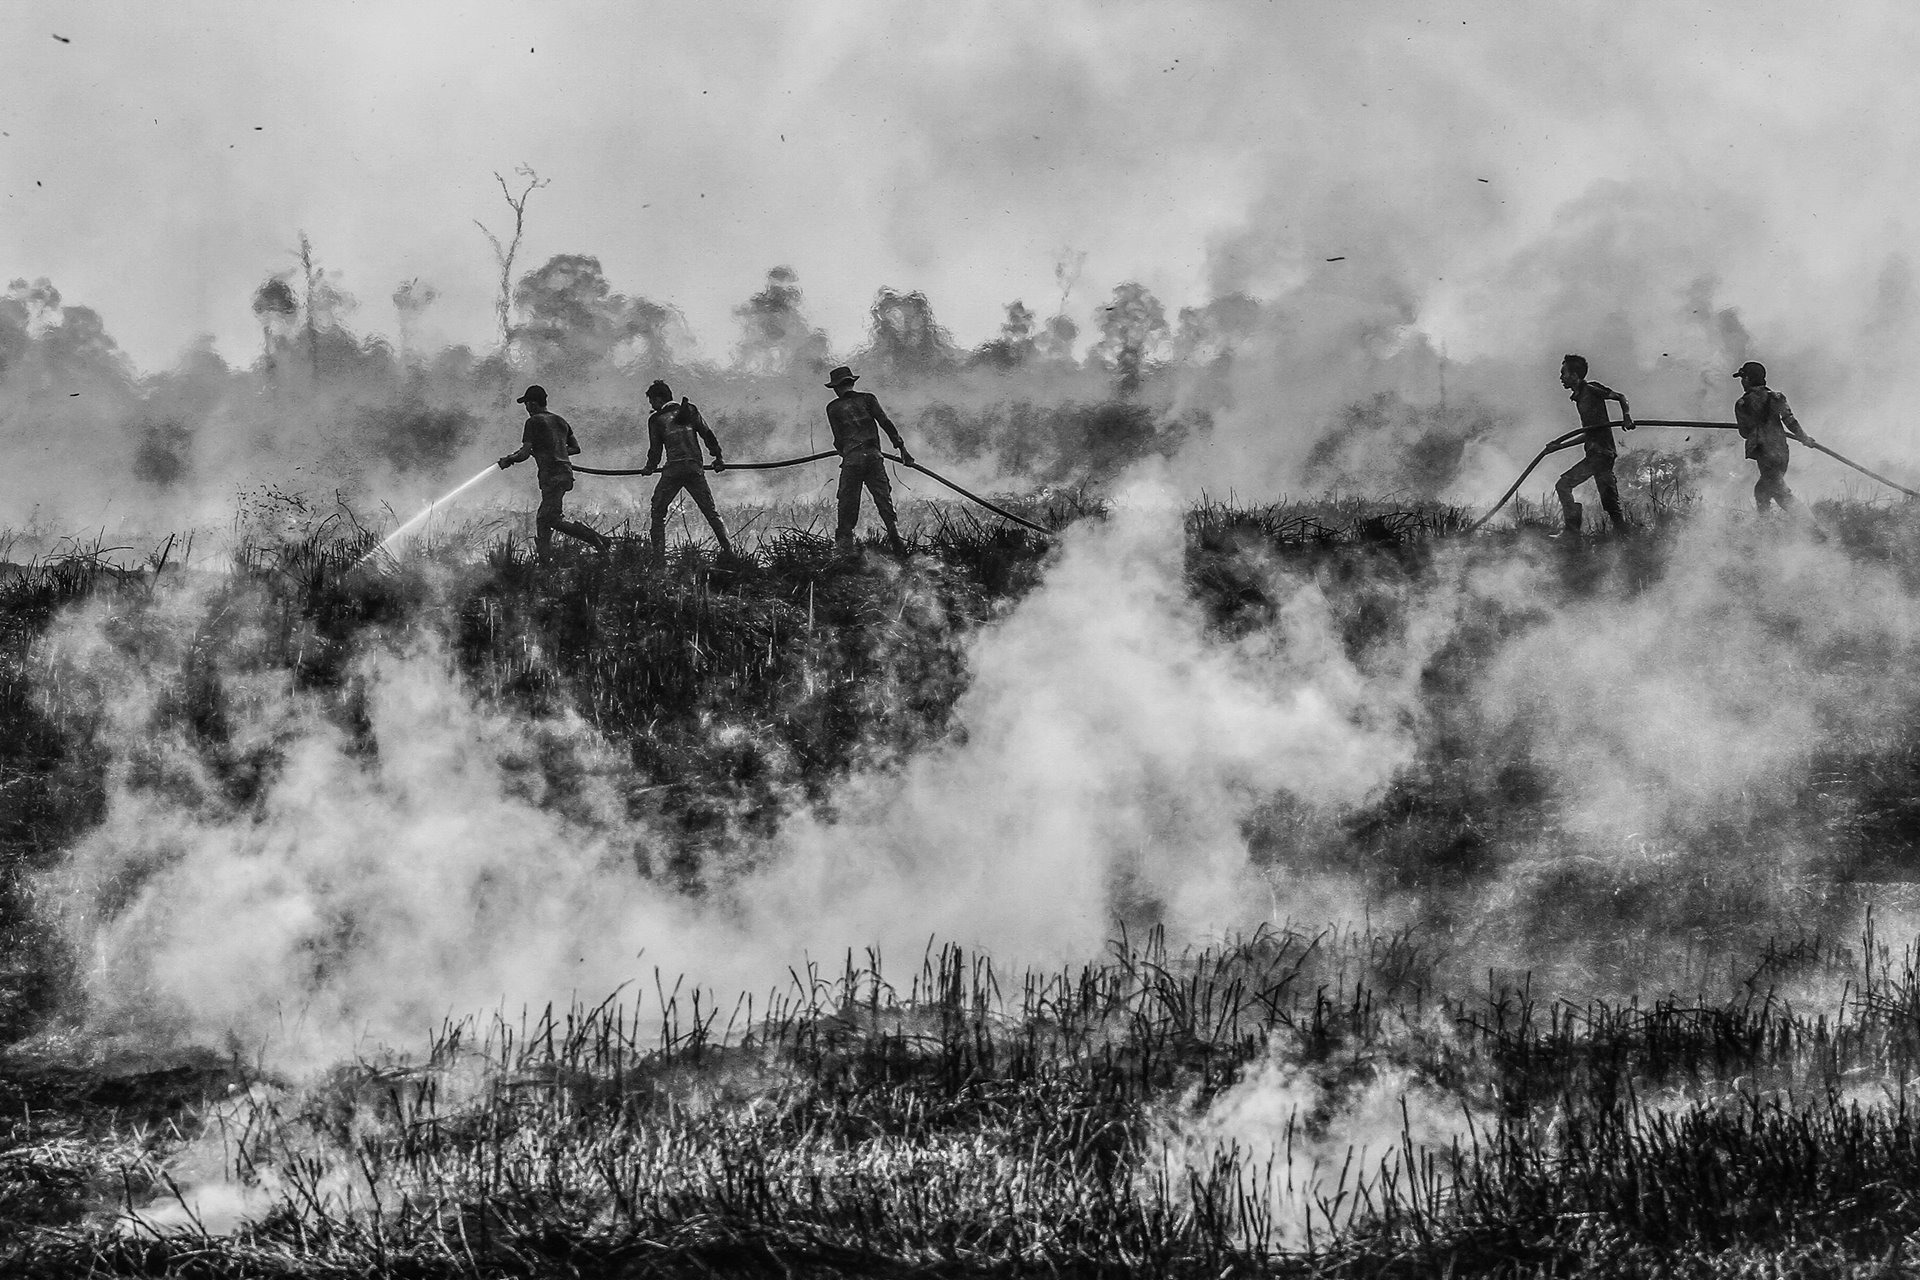 <p>Firefighters battle a fire in Ogan Ilir, South Sumatra. The World Bank estimated that the 2015 fires crisis cost Indonesia US$16 billion in losses to forestry, agriculture, tourism and other industries.</p>
